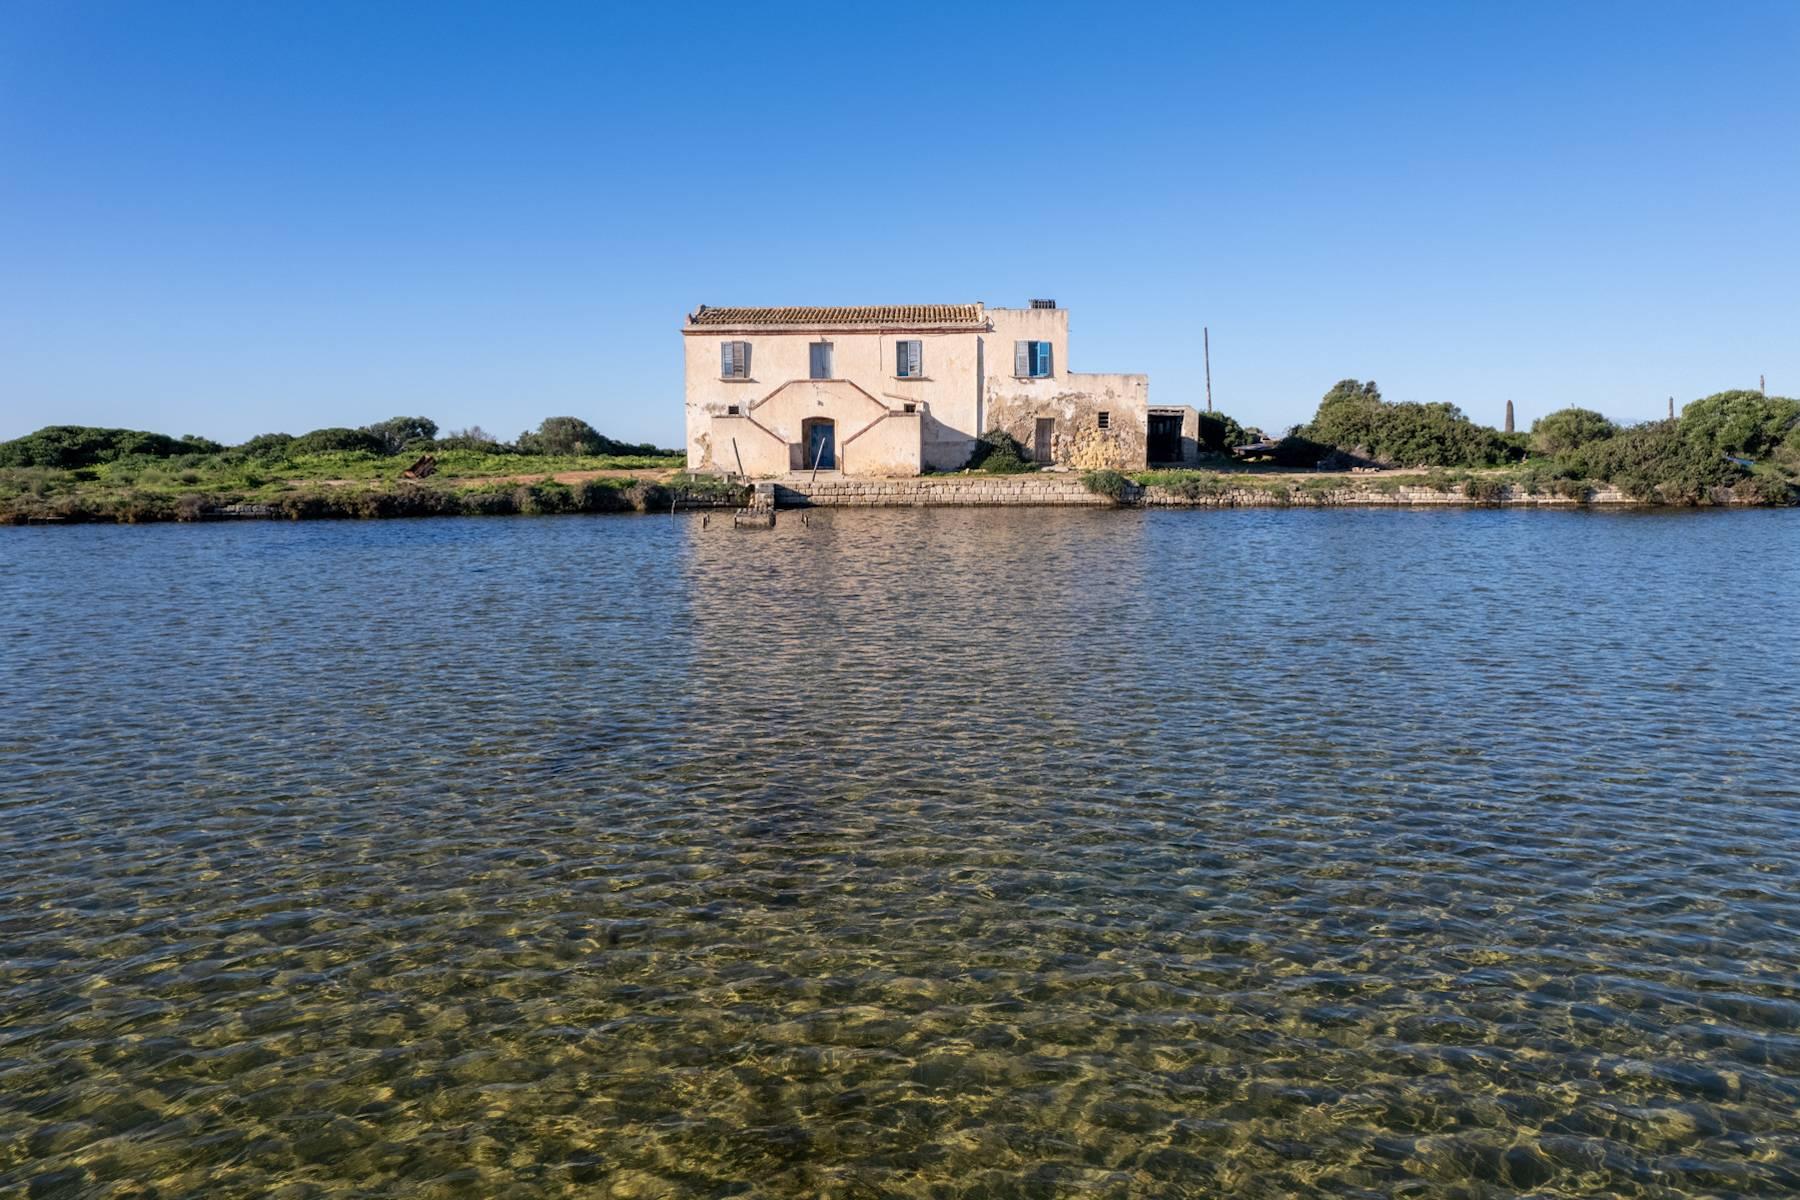 Pied dan s l'eau historic residence on Isola Lunga with private landing stage - 1